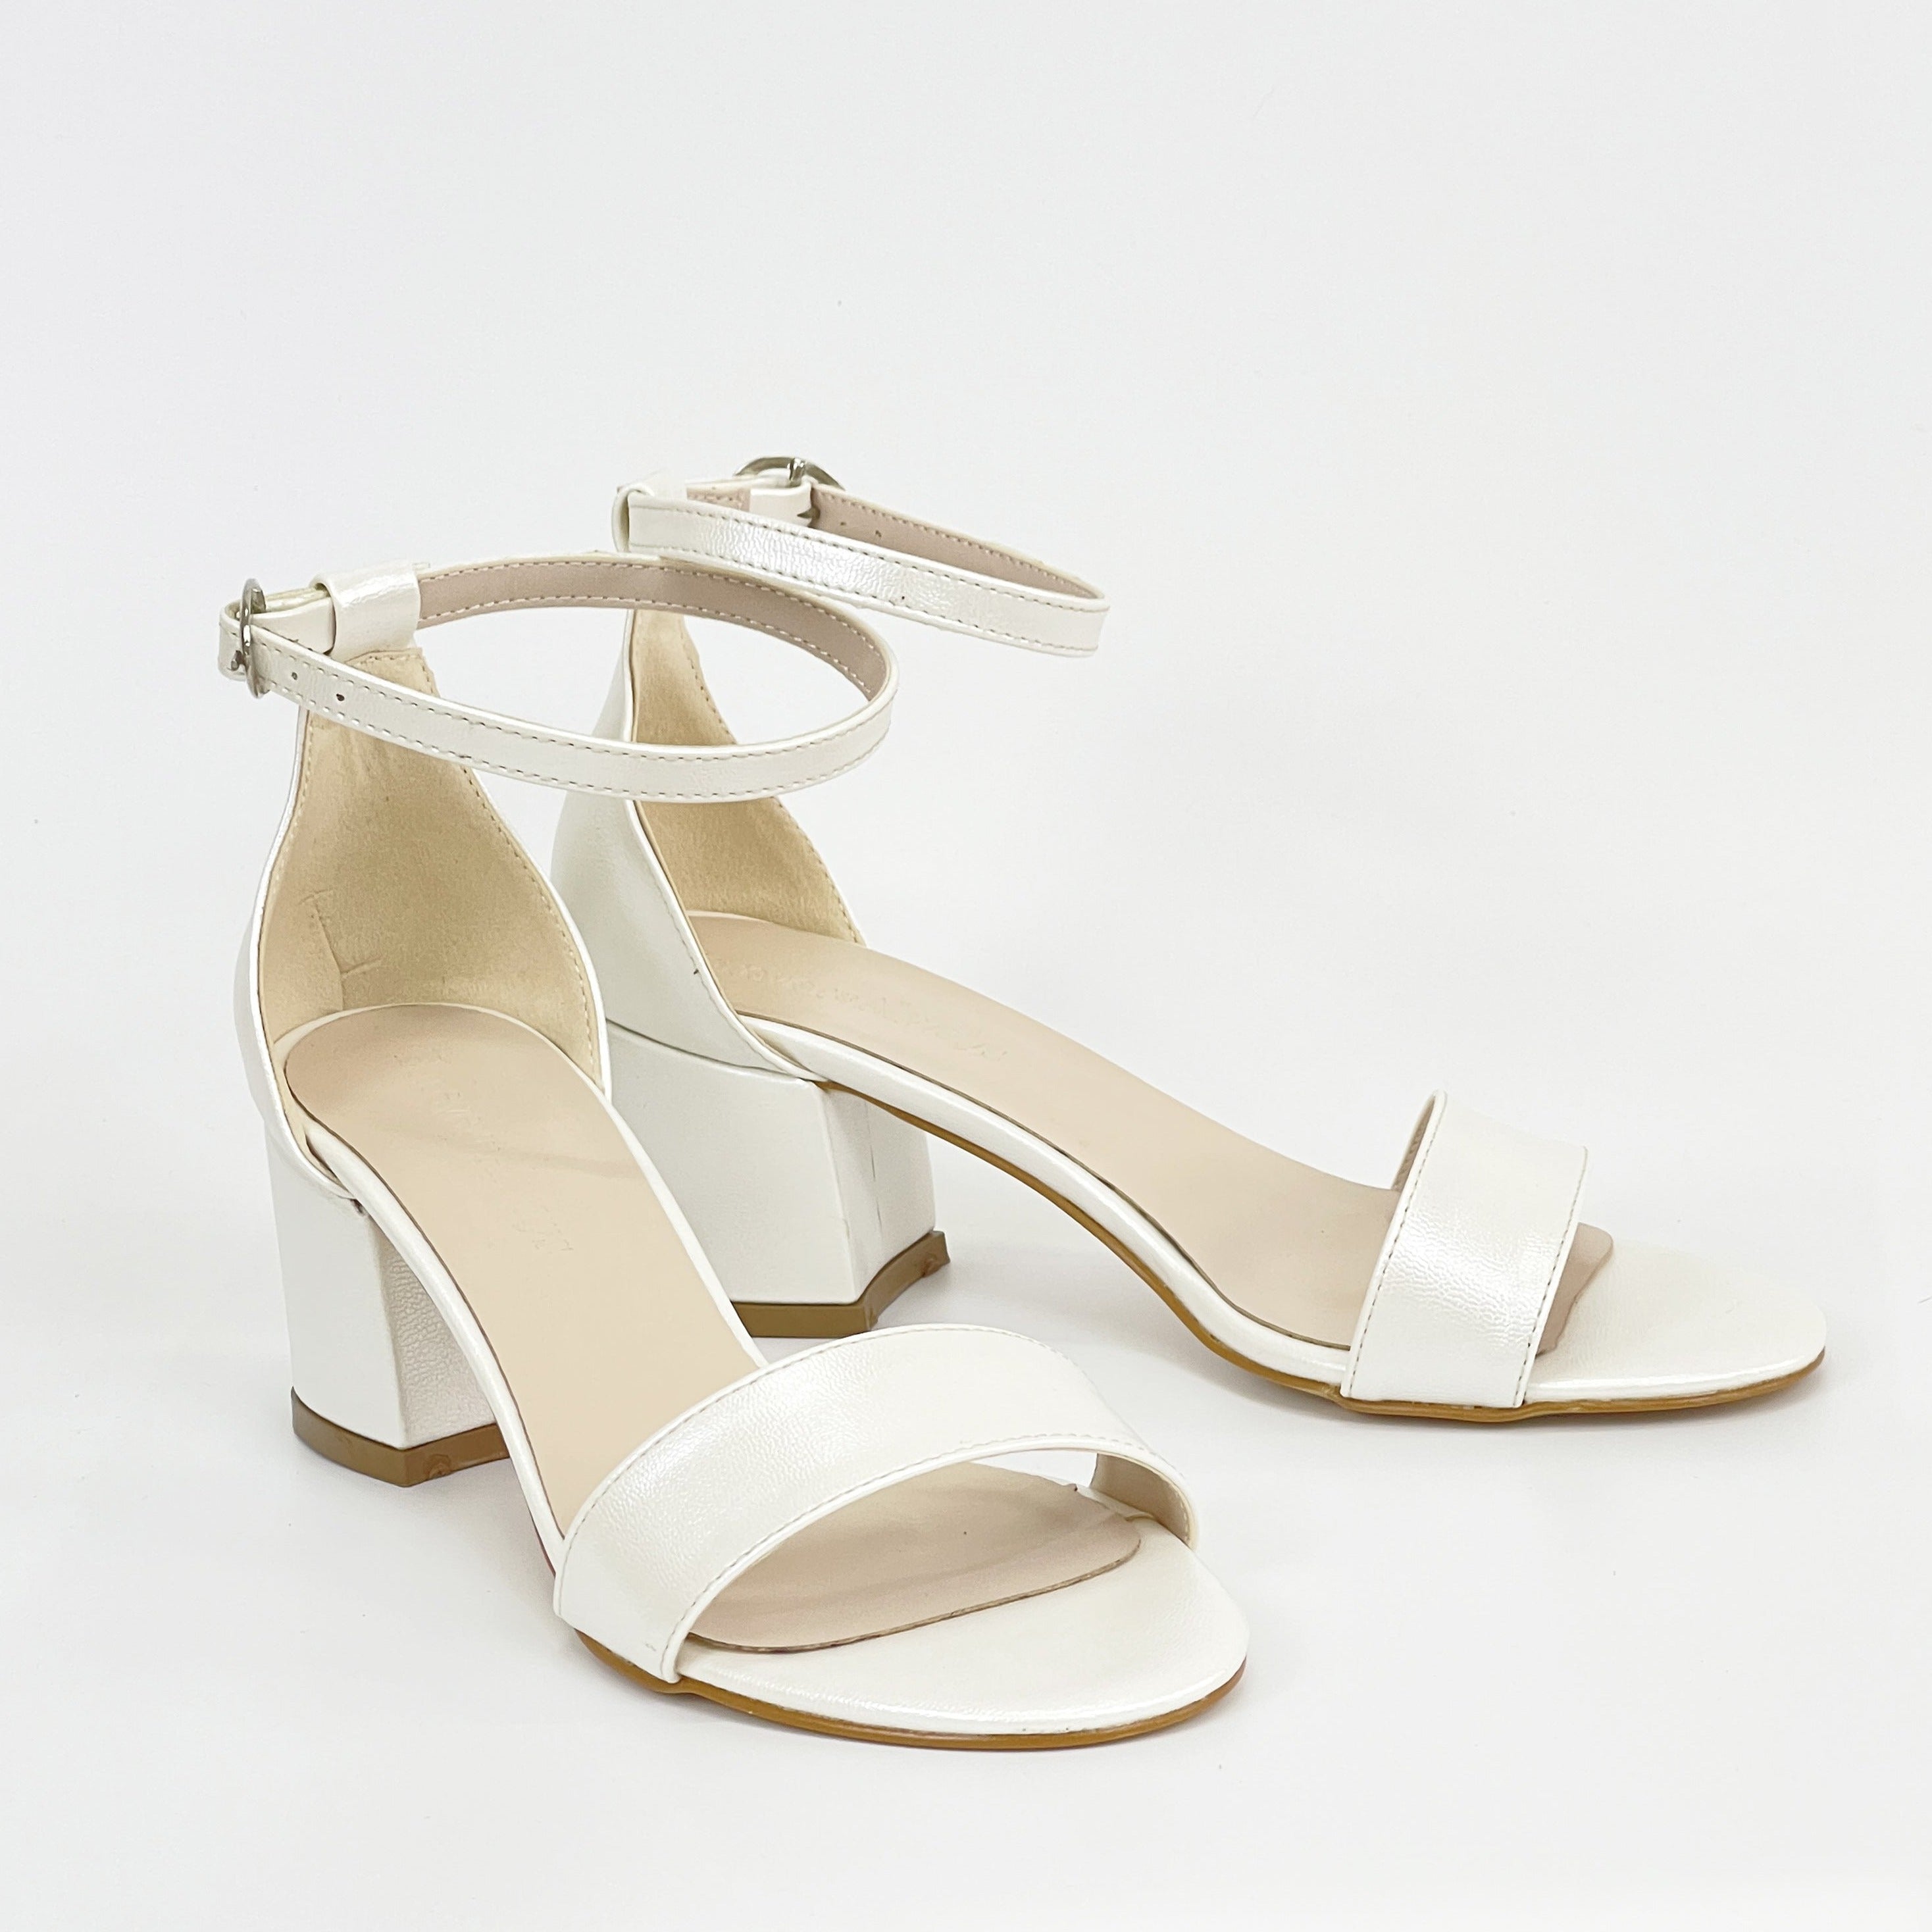 Ivory white sandals, White sandals in ivory, Stylish ivory white shoes, Chic white sandals, Trendy ivory white footwear, Fashionable white sandals, Elegant ivory white heels, Classic white sandals, Comfortable ivory white shoes, Ivory white sandals for women.